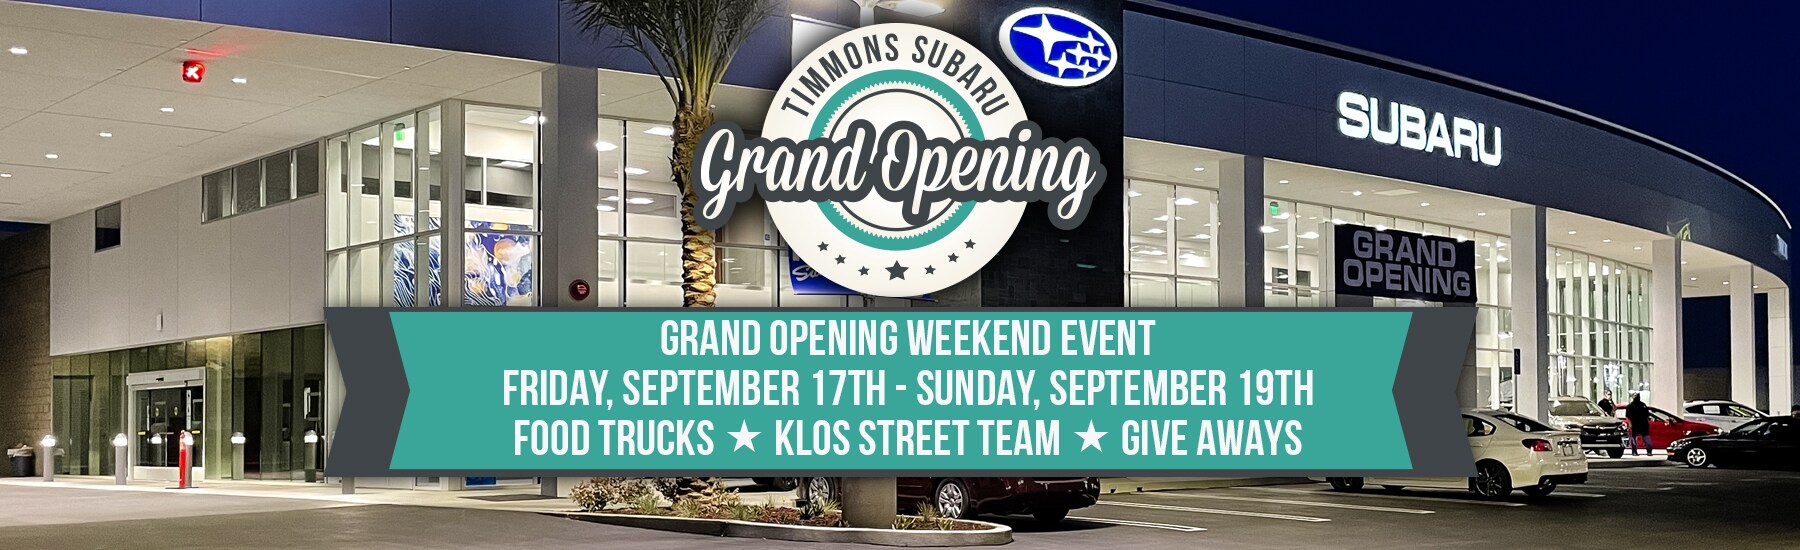 The Timmons Subaru of Long Beach Grand Opening Weekend Event